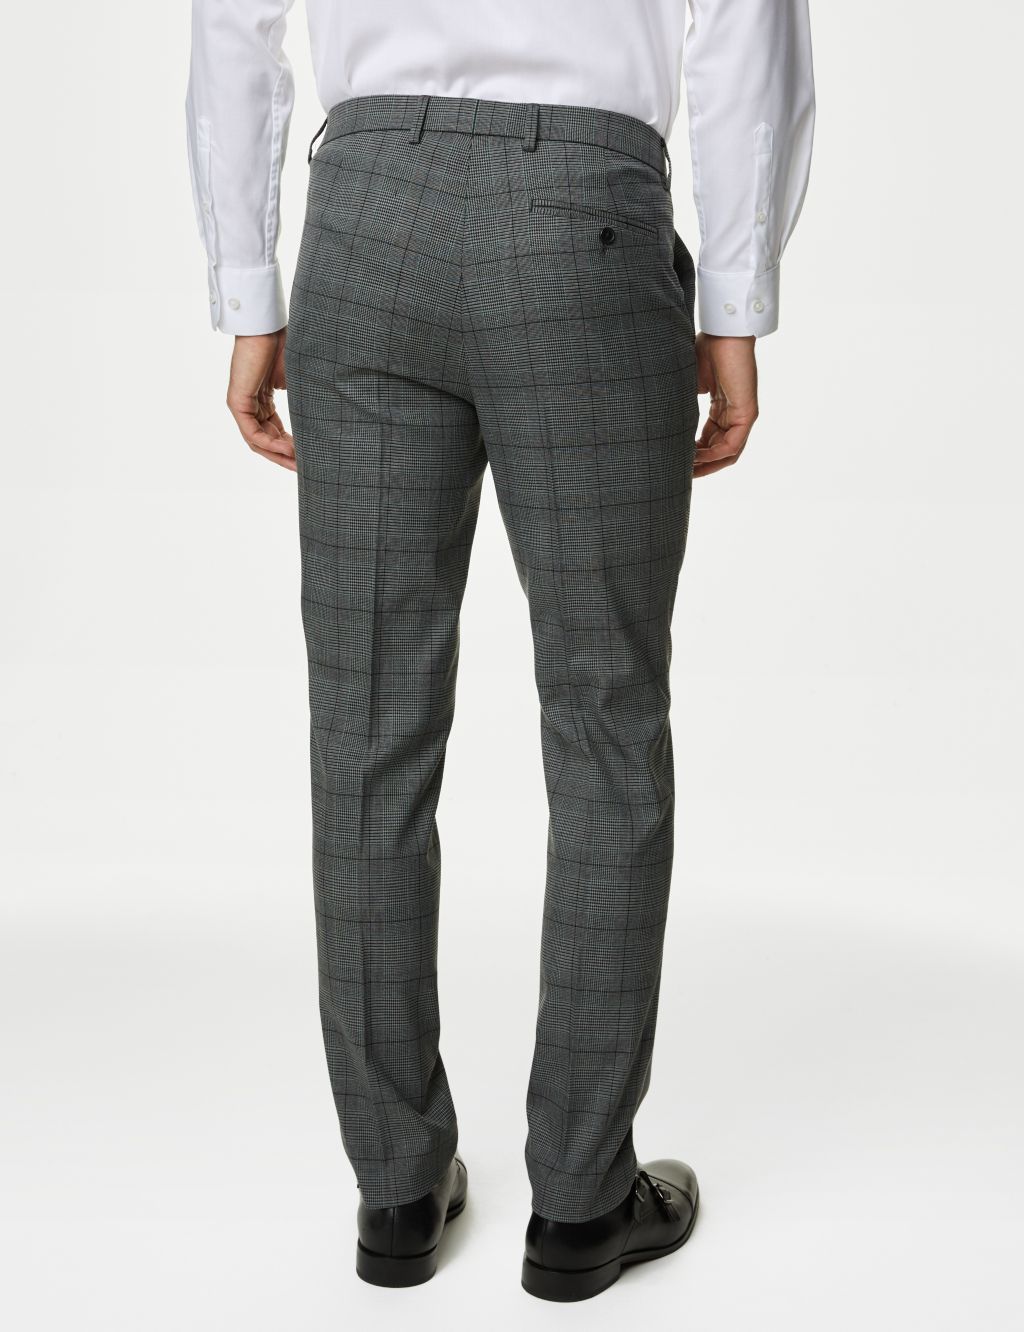 Skinny Fit Prince of Wales Check Suit Trousers image 5